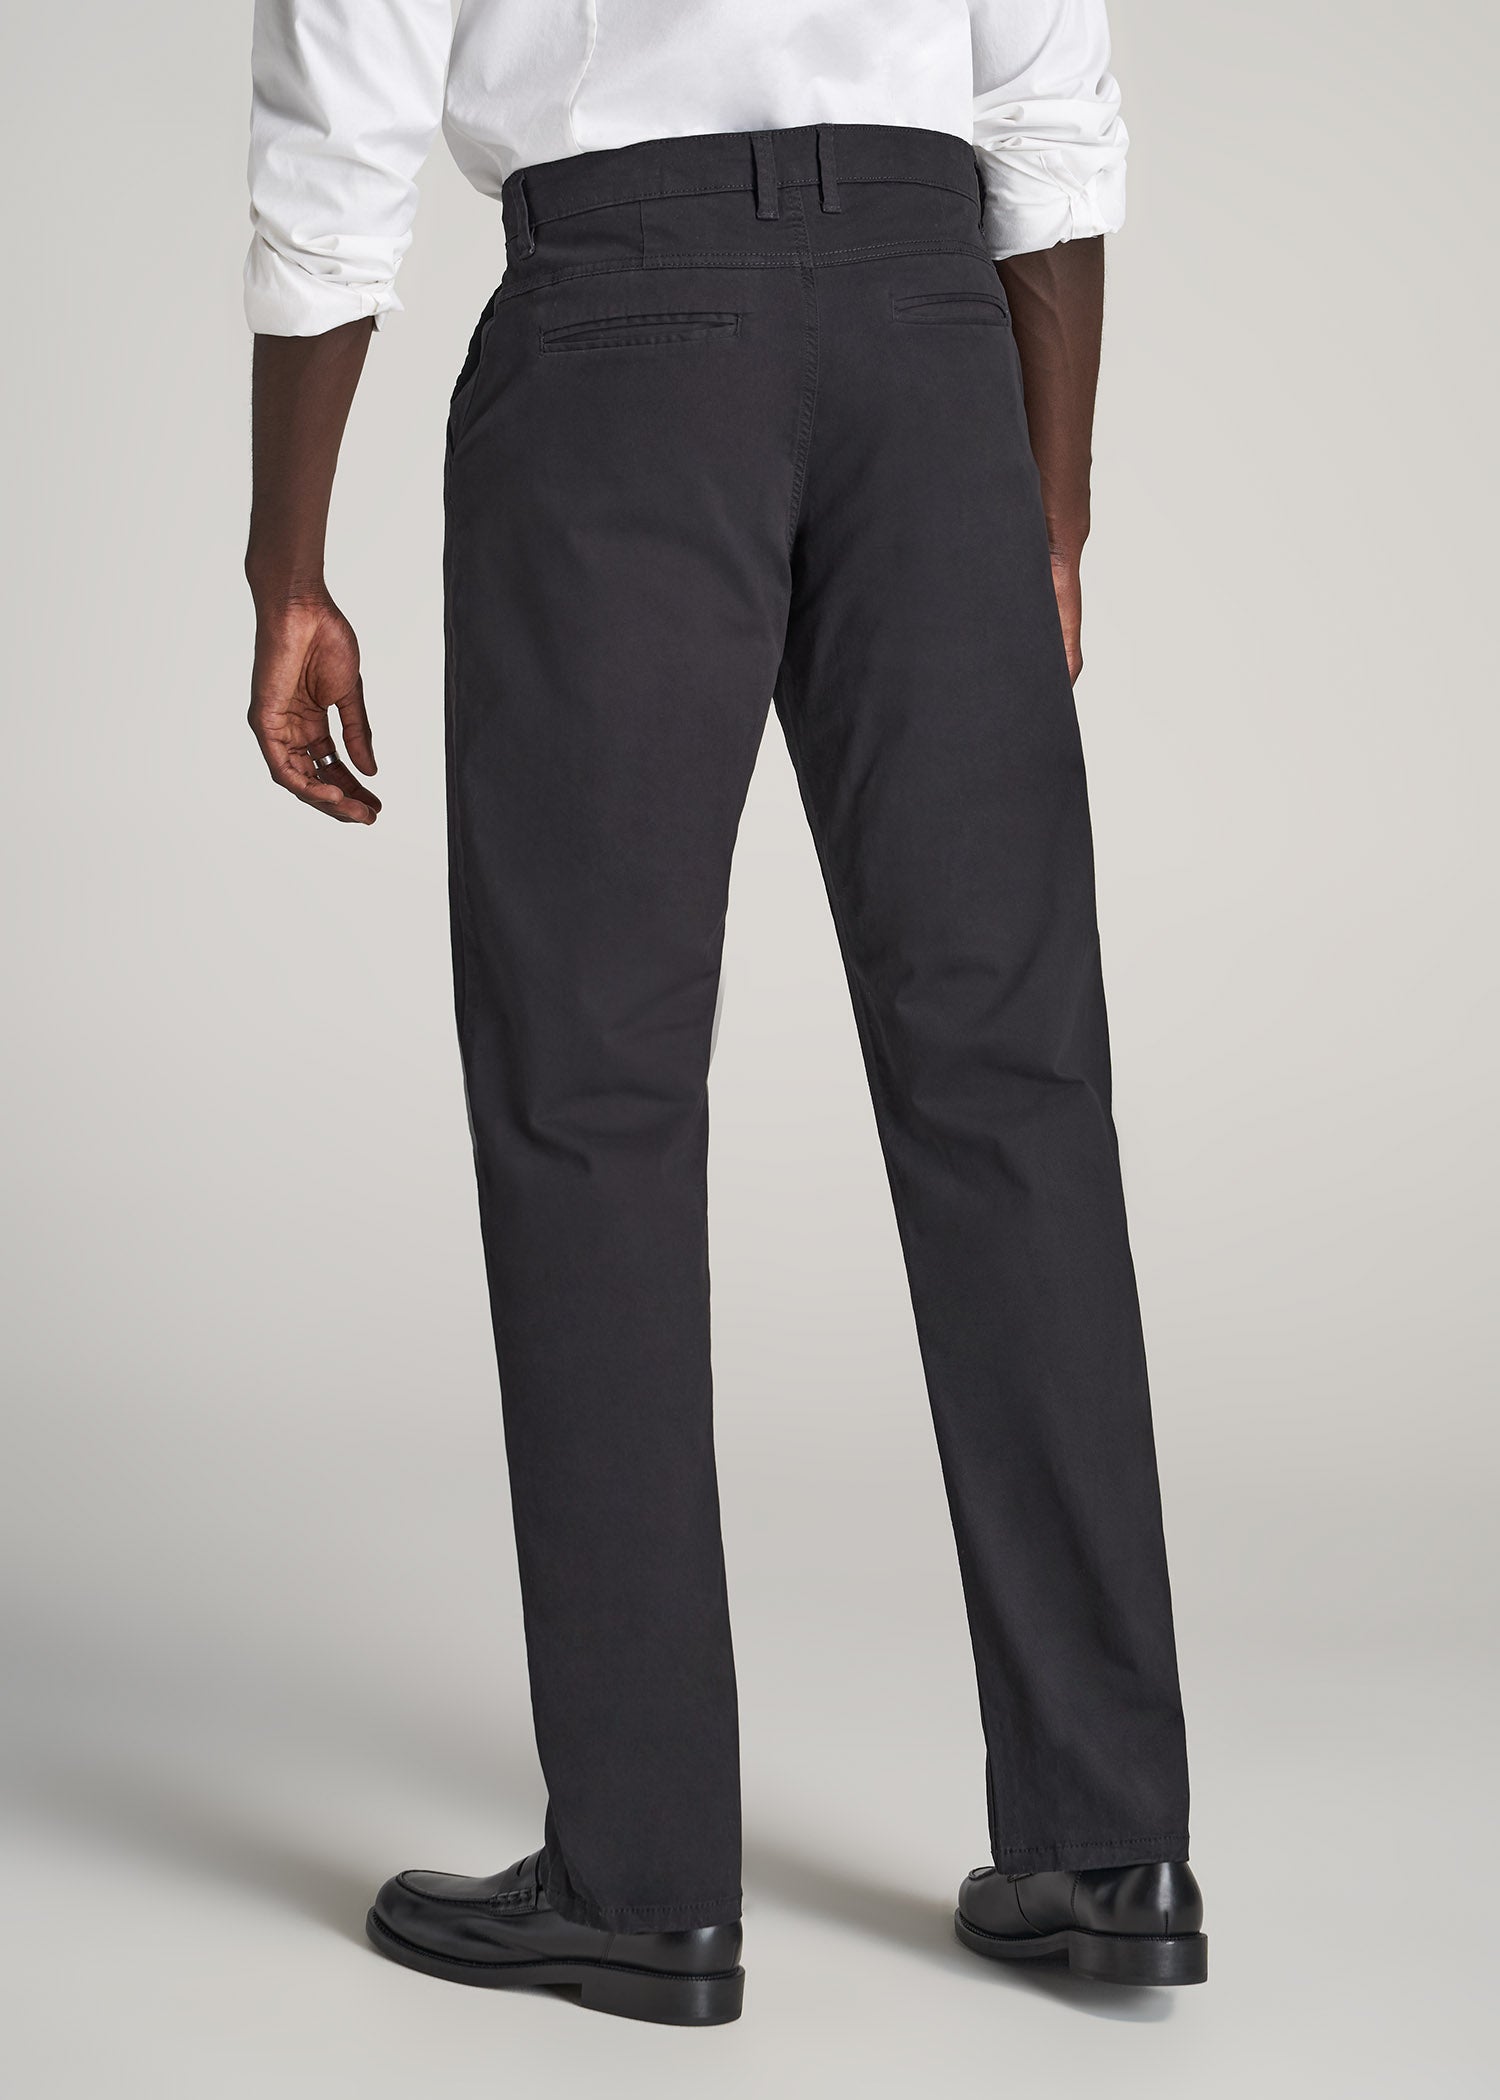 Relaxed Fit Lightweight Chinos - GANT